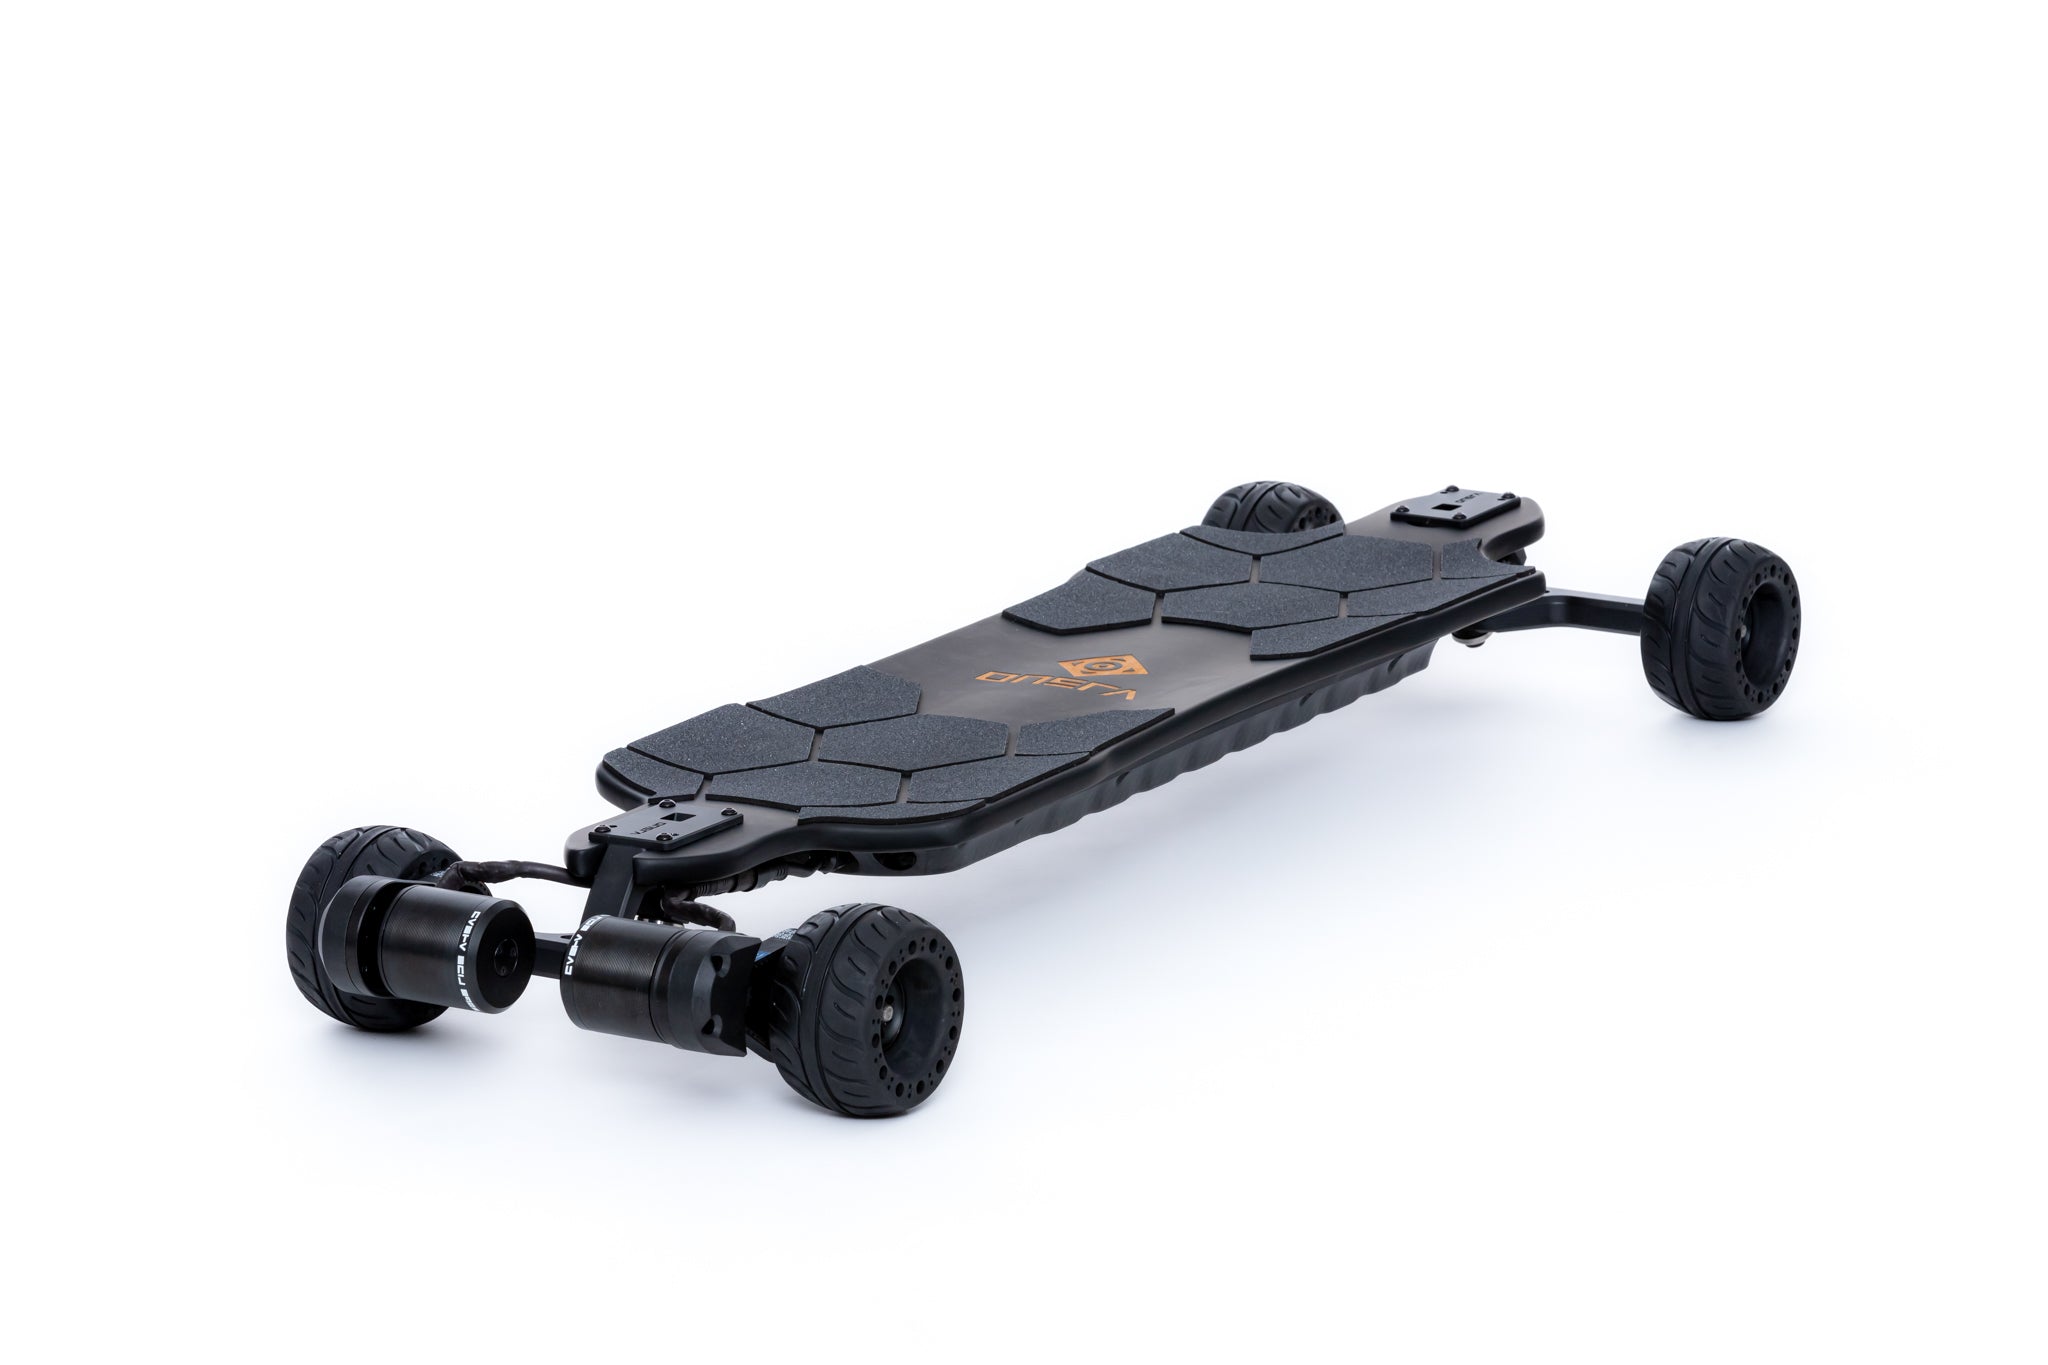 The Onsra Black Carve 3 electric skateboard features a sleek black design with a powerful electric motor, allowing for smooth and effortless cruising. Its durable construction and high-quality components make it a reliable option for both experienced and beginner riders. Its also has an upgraded Remote Control and a top speed of 25mph. 